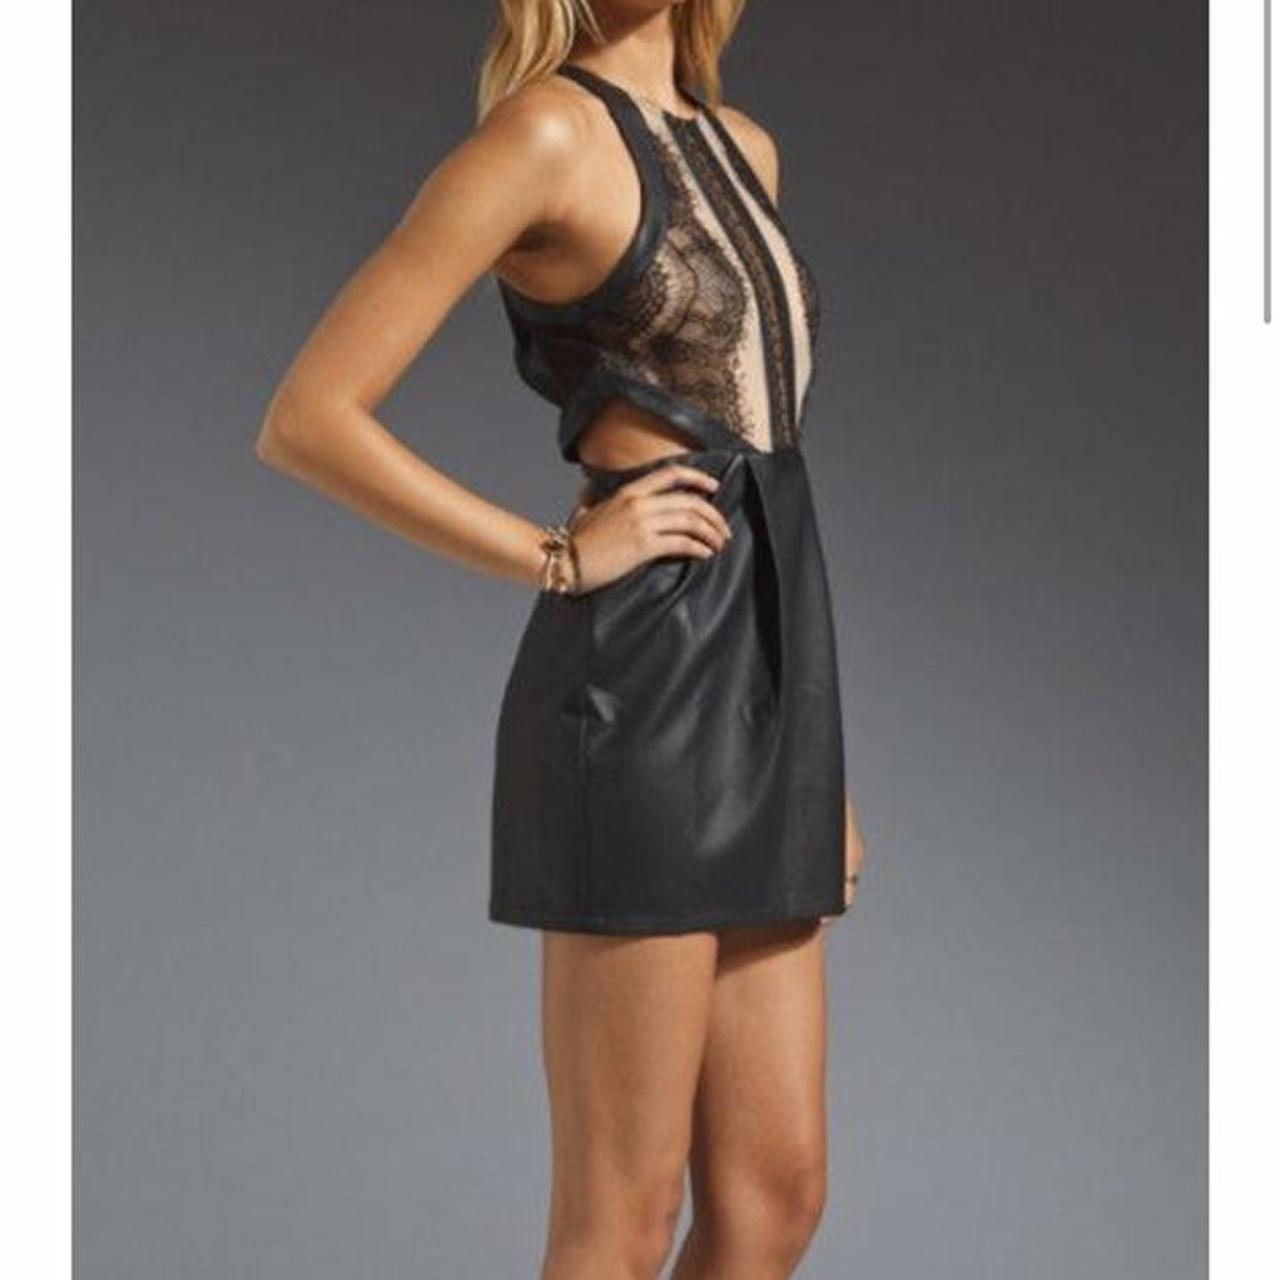 Product Image 2 - Three floor: lace leather dress

#lacedress#leatherdress#minidress